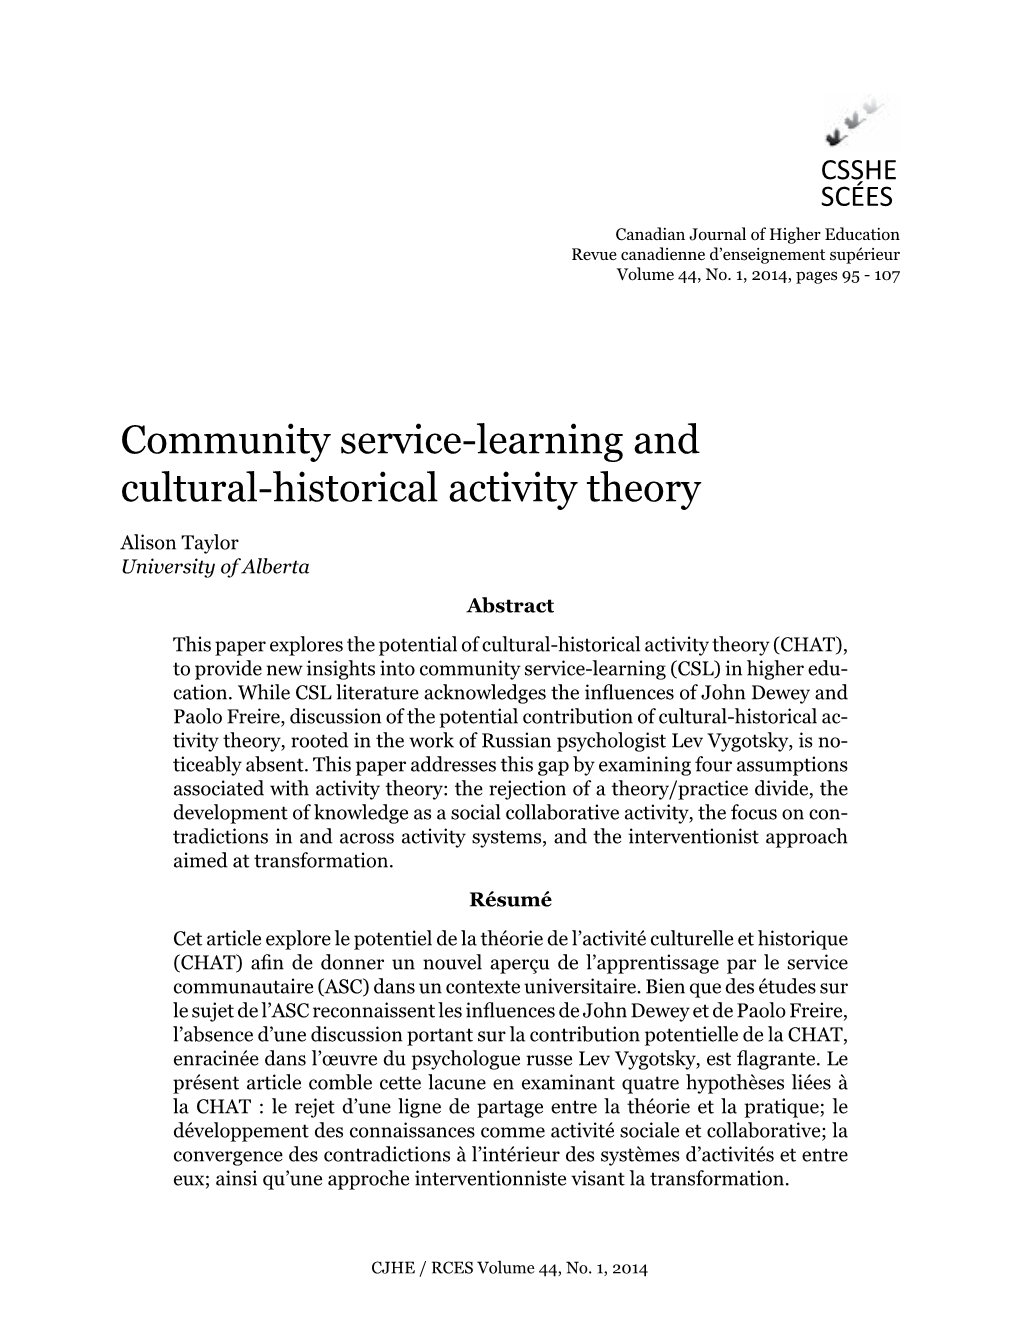 Community Service-Learning and Cultural-Historical Activity Theory / A